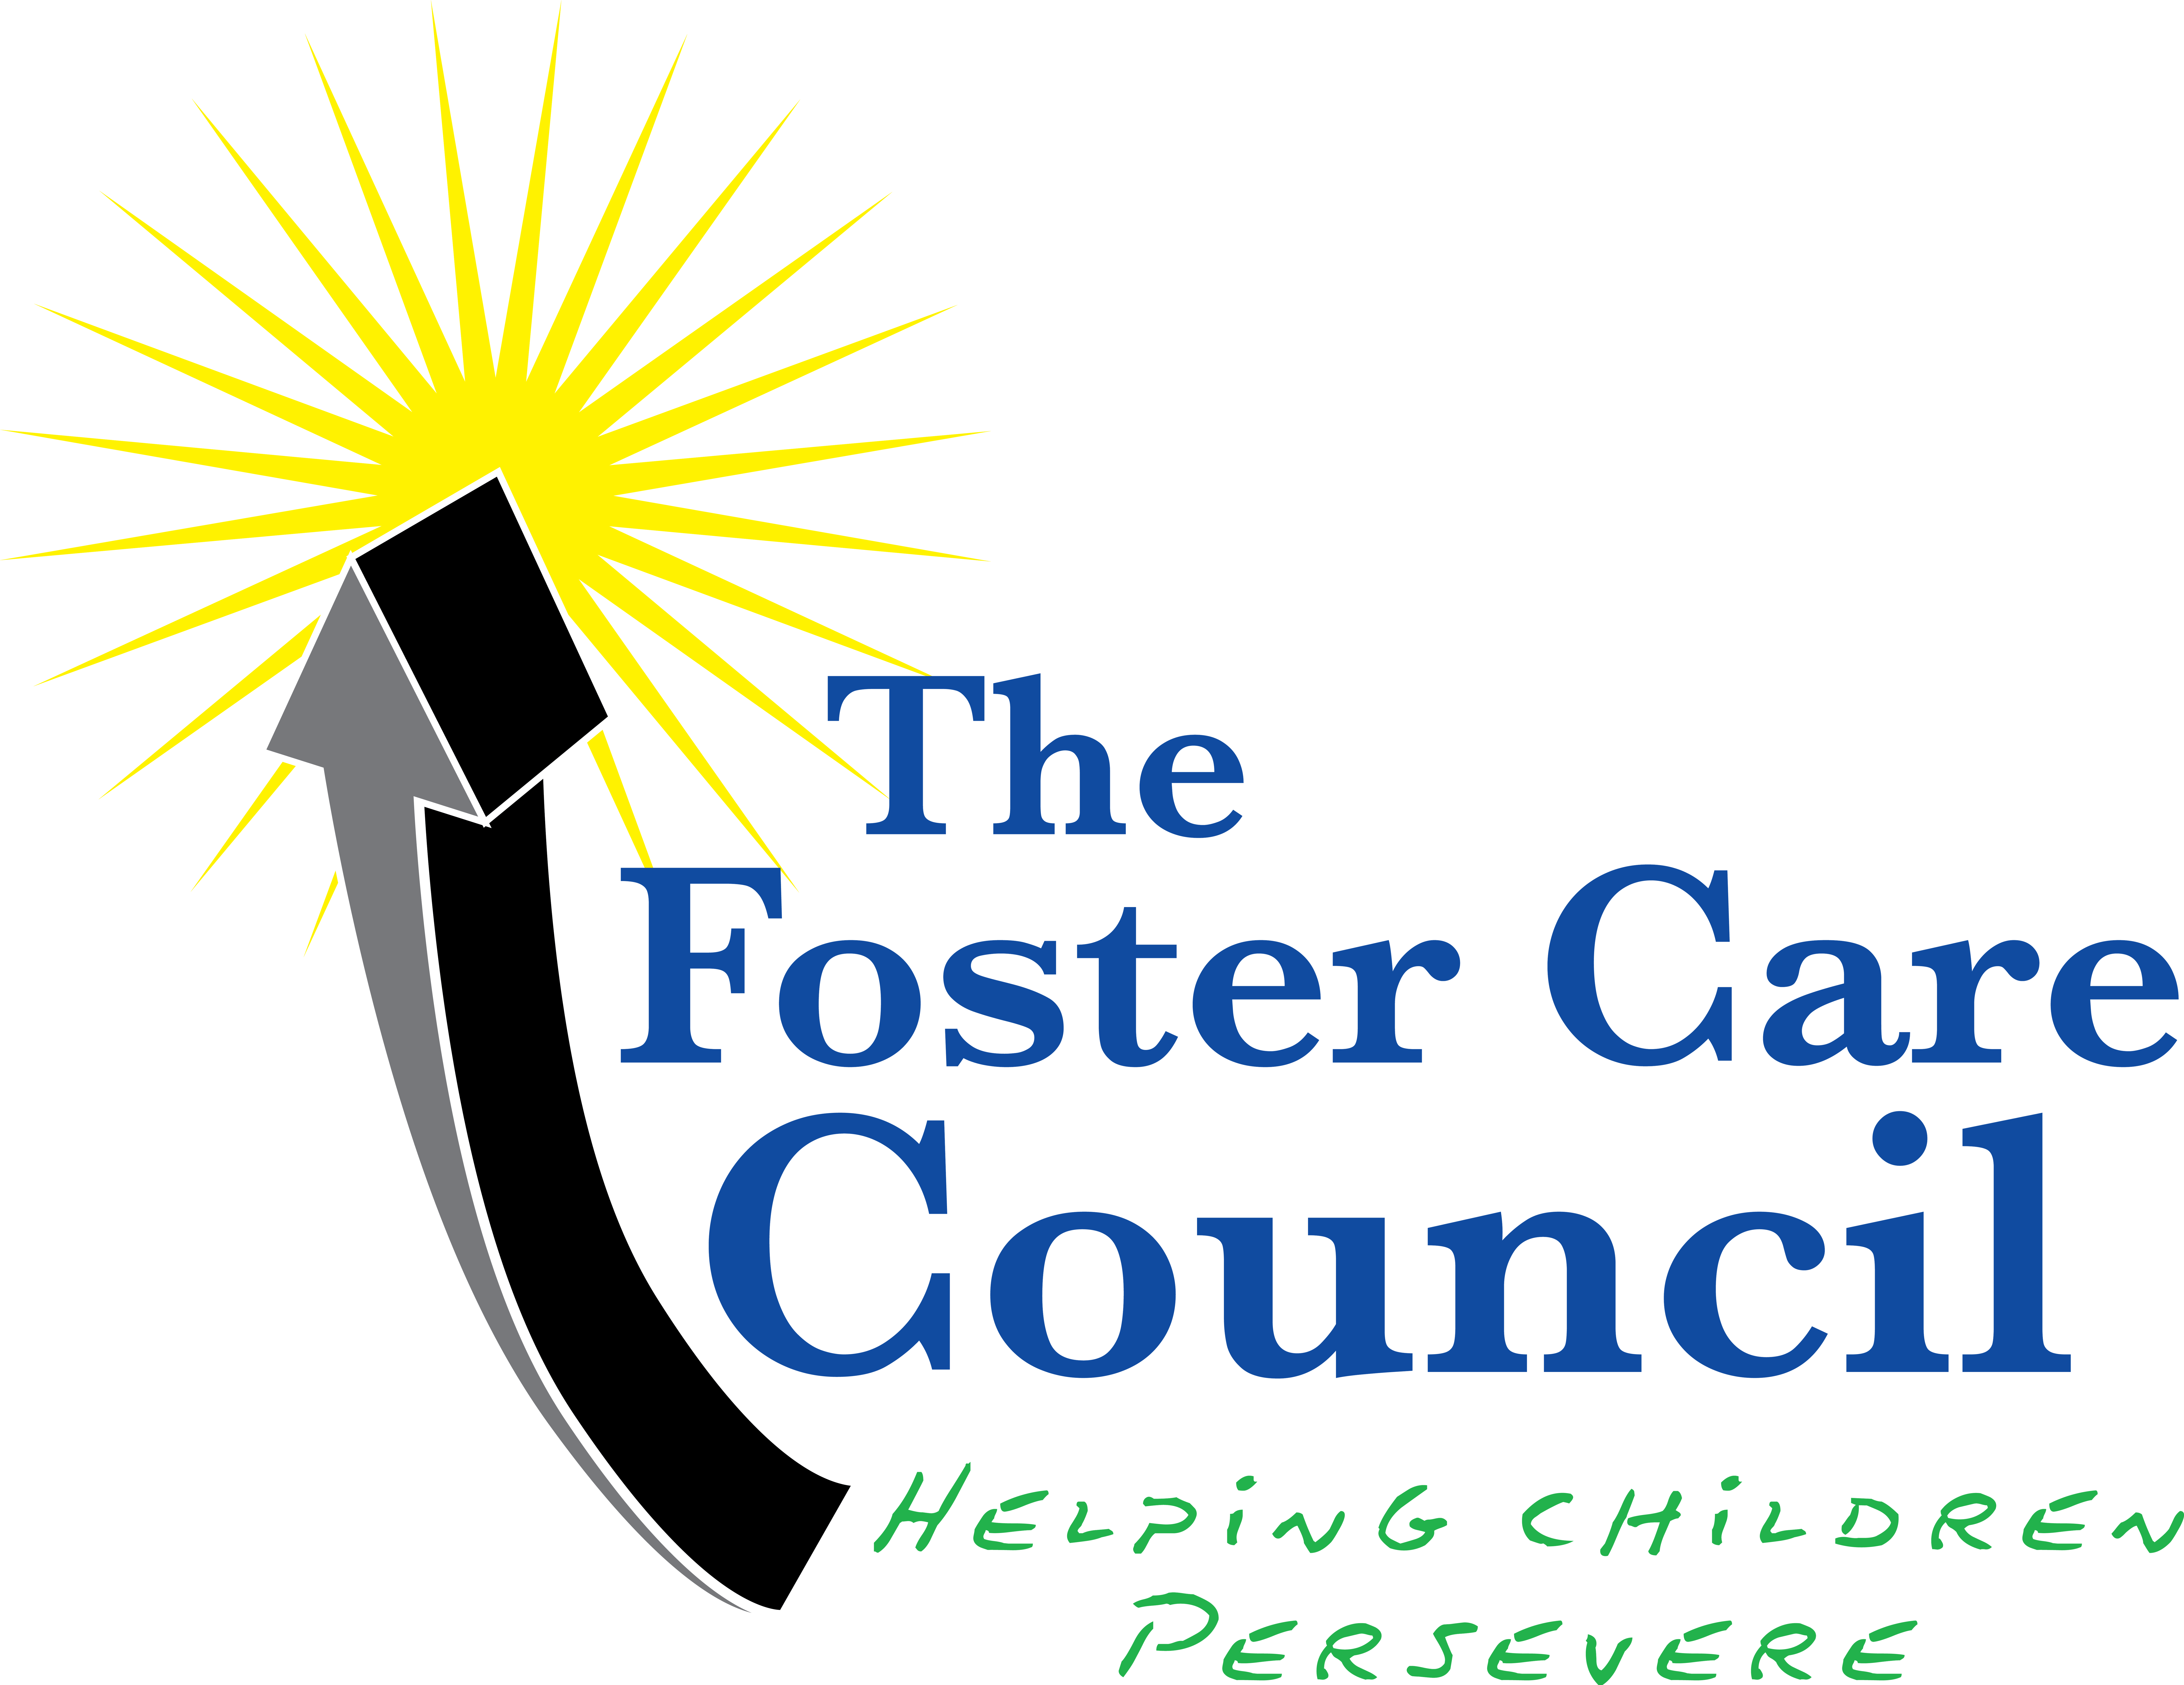 The Foster Care Council